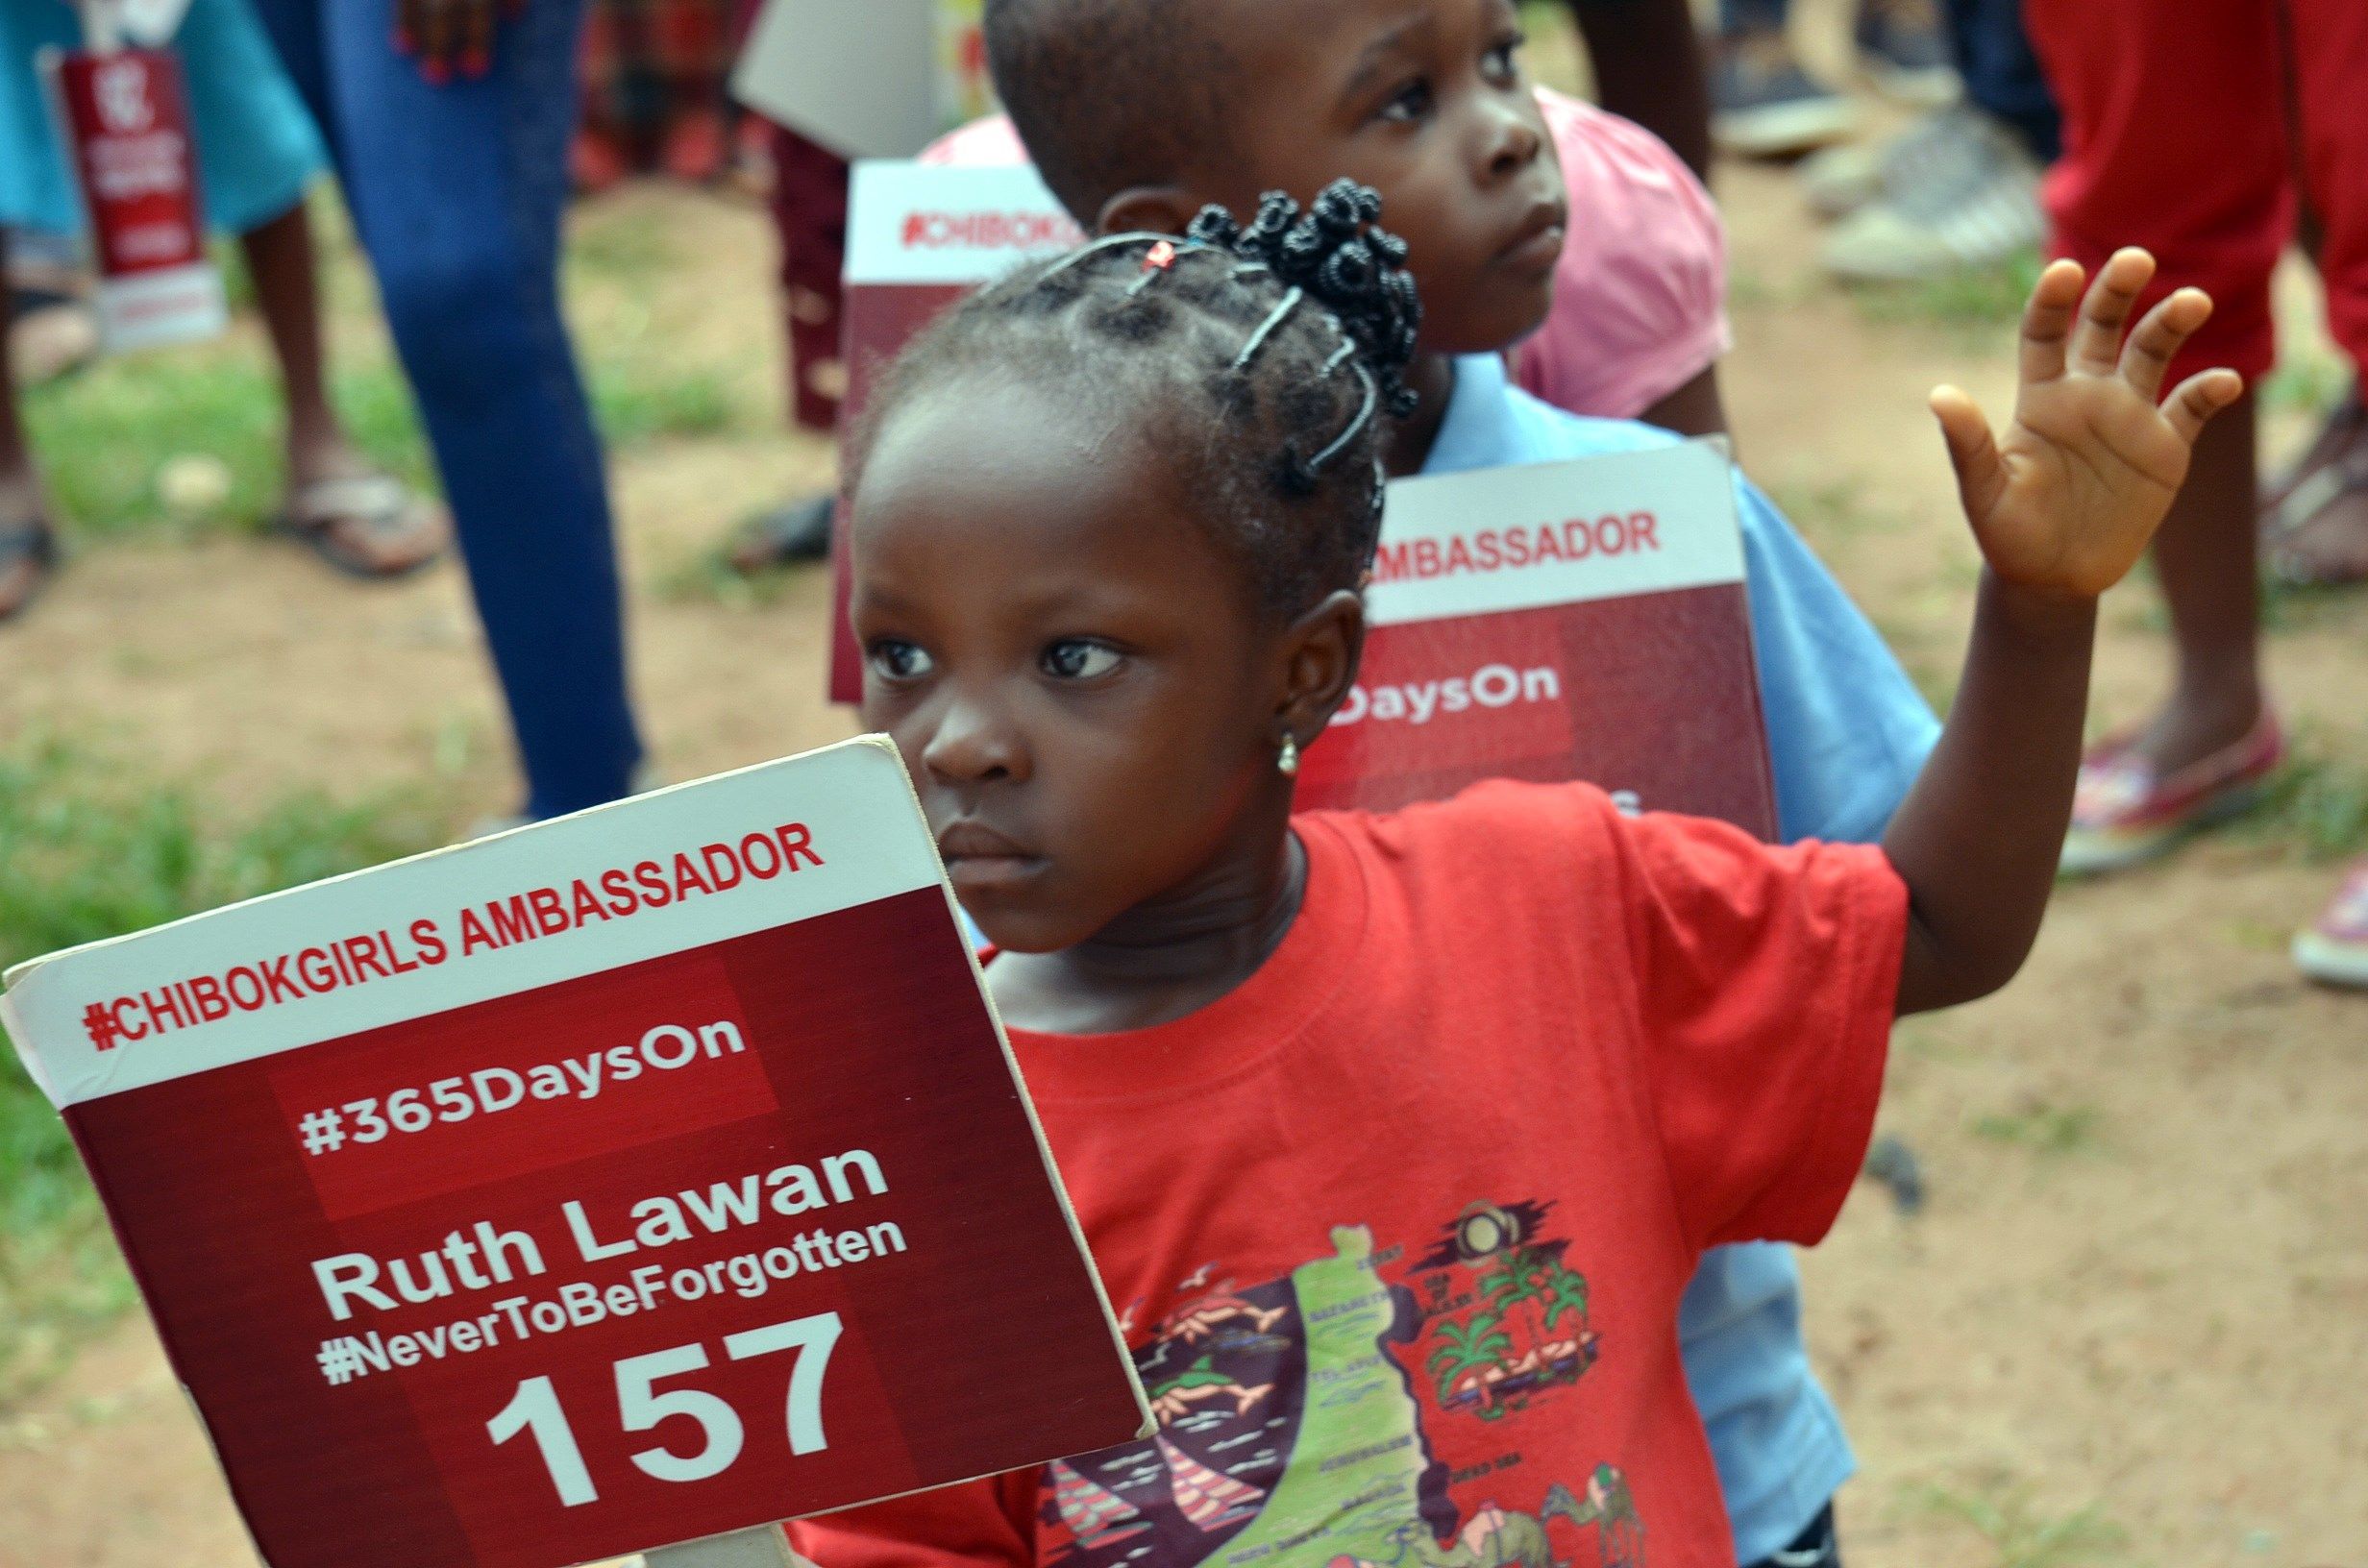 A young girl campaigns for the missing Chibok girls abducted by Boko Haram.